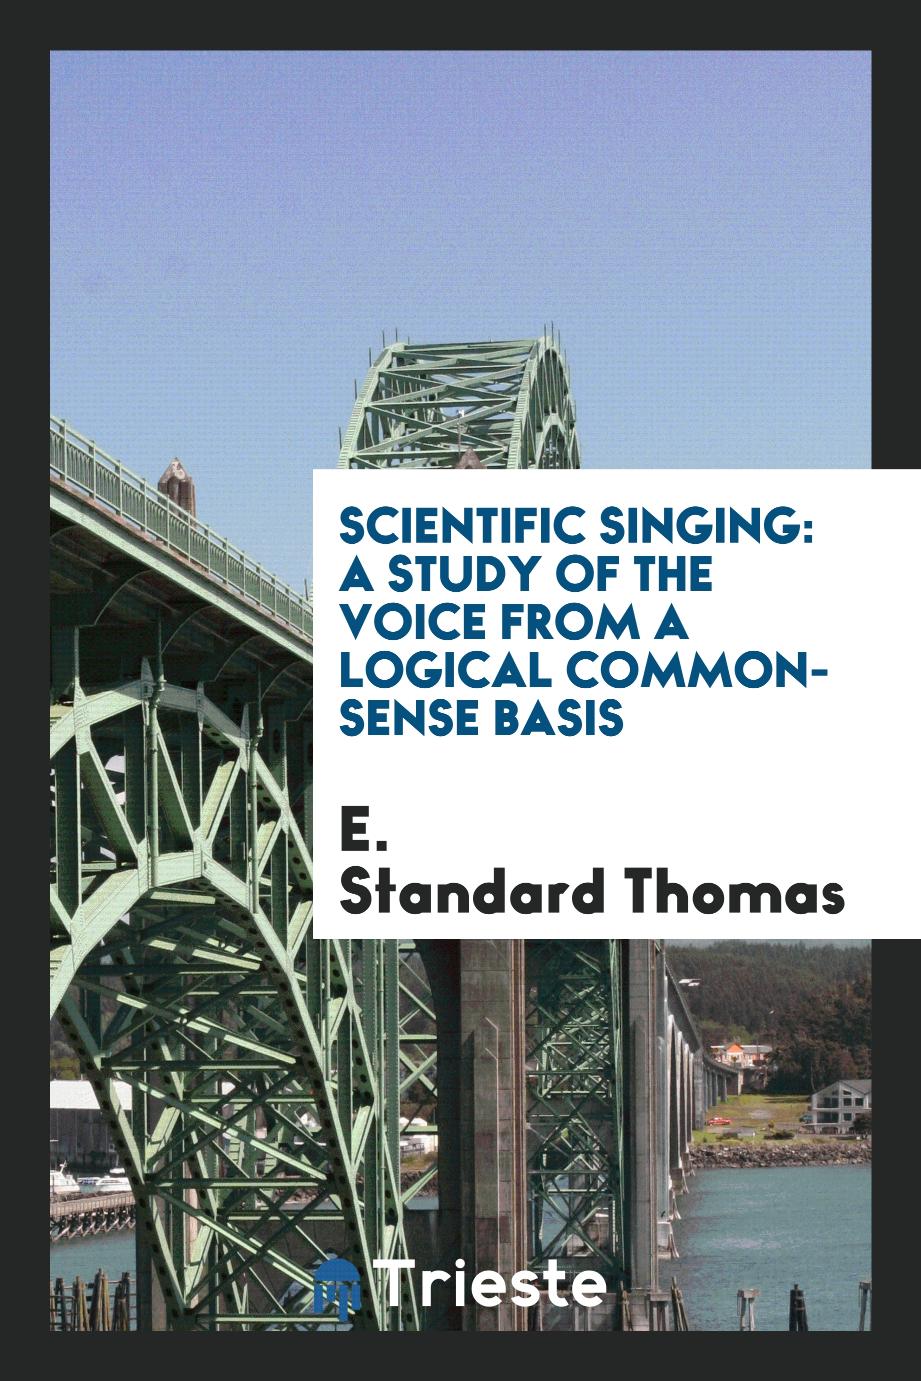 Scientific Singing: A Study of the Voice from a Logical Common-Sense Basis